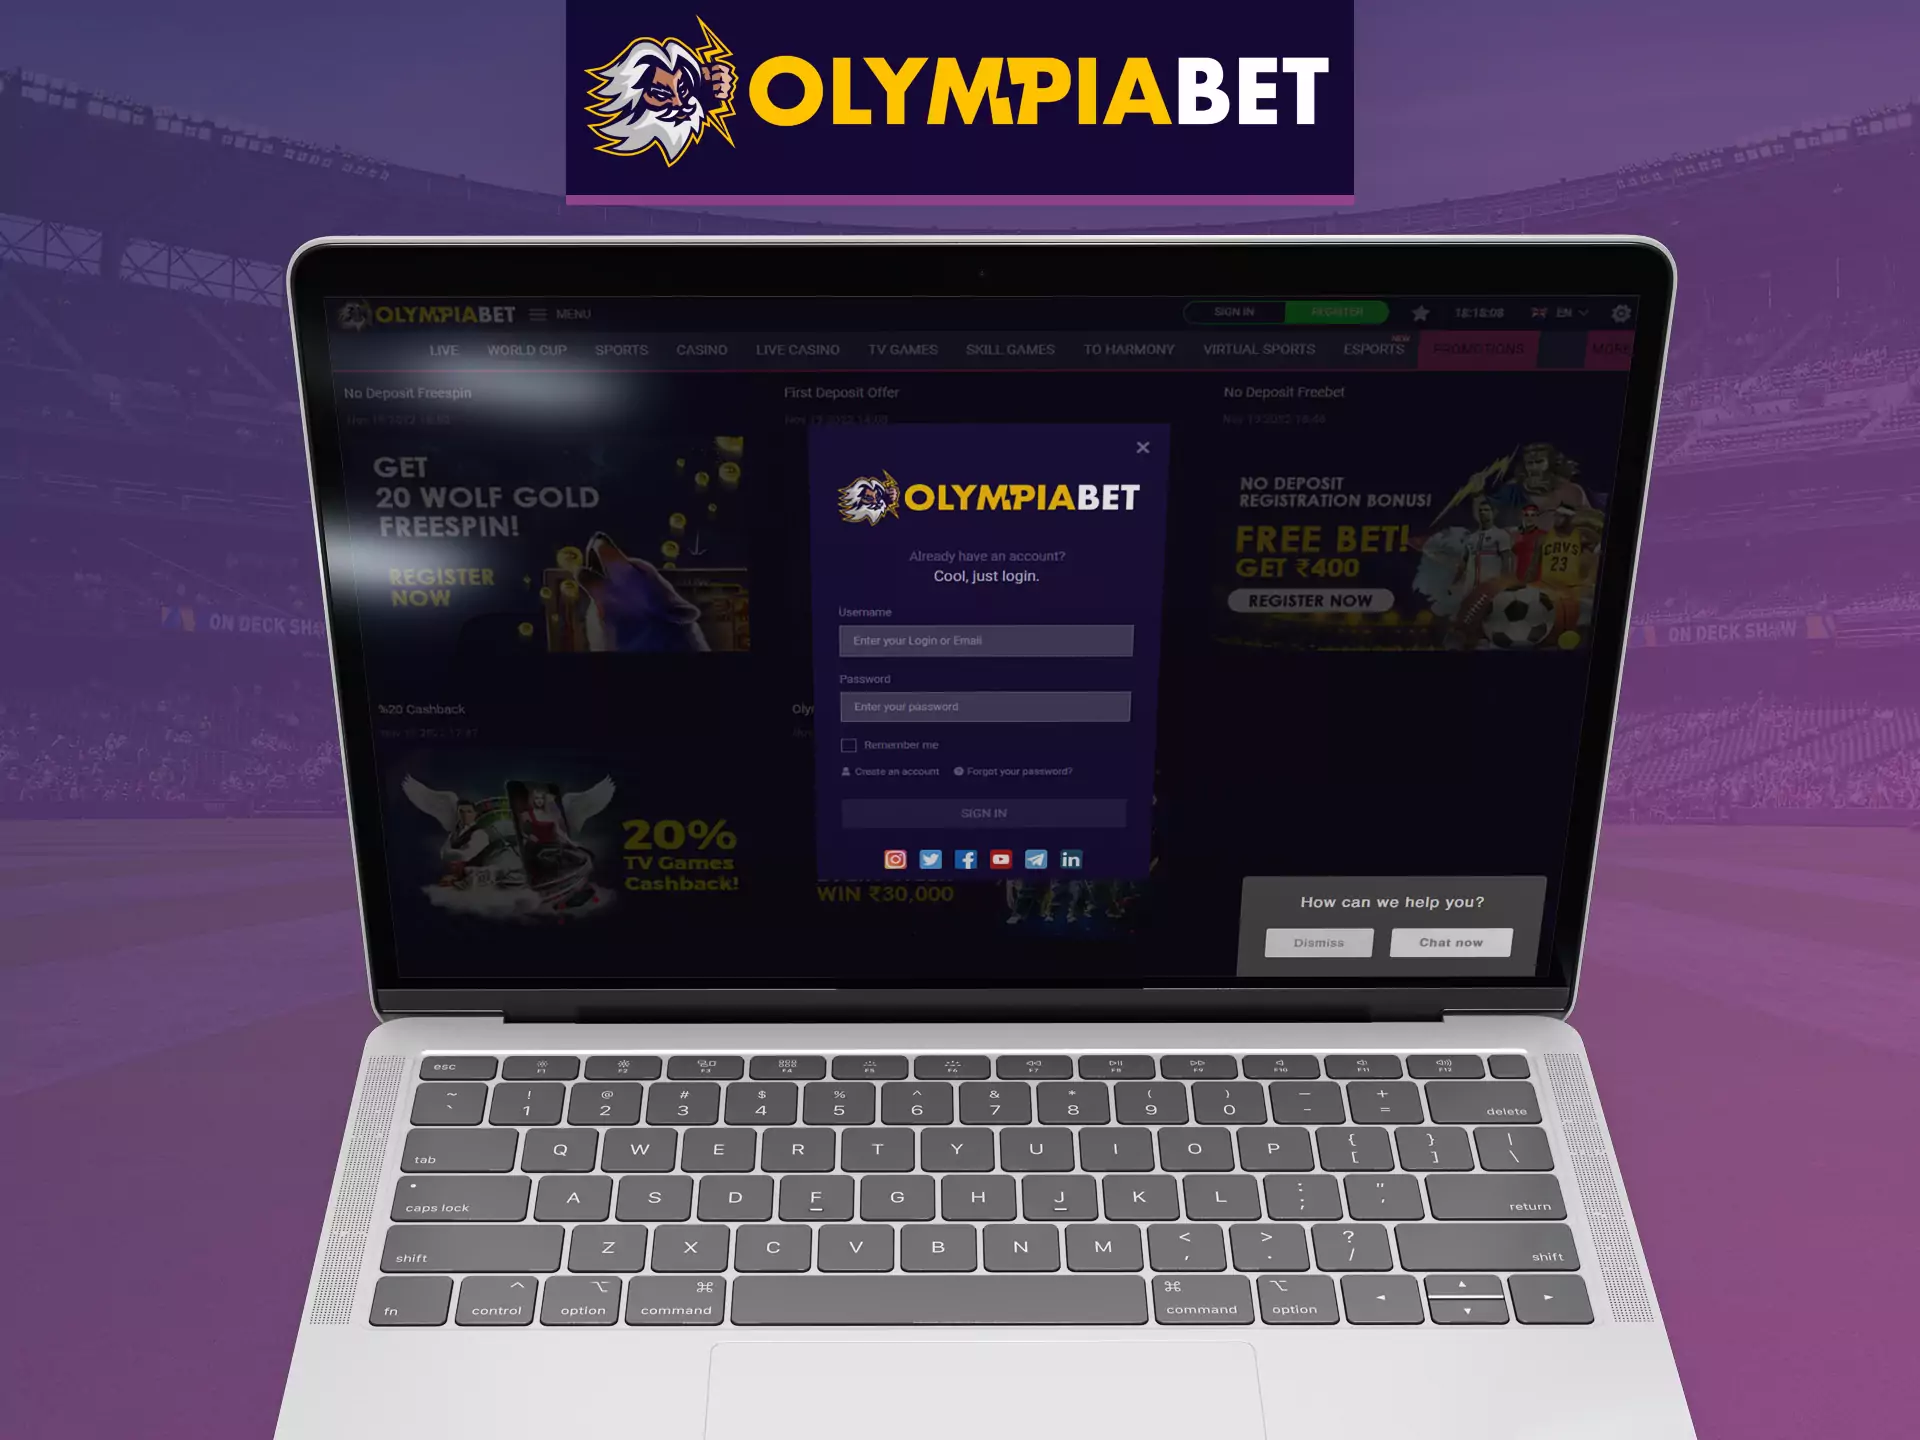 Log into your OlympiaBet account, get special bonuses and place bets.